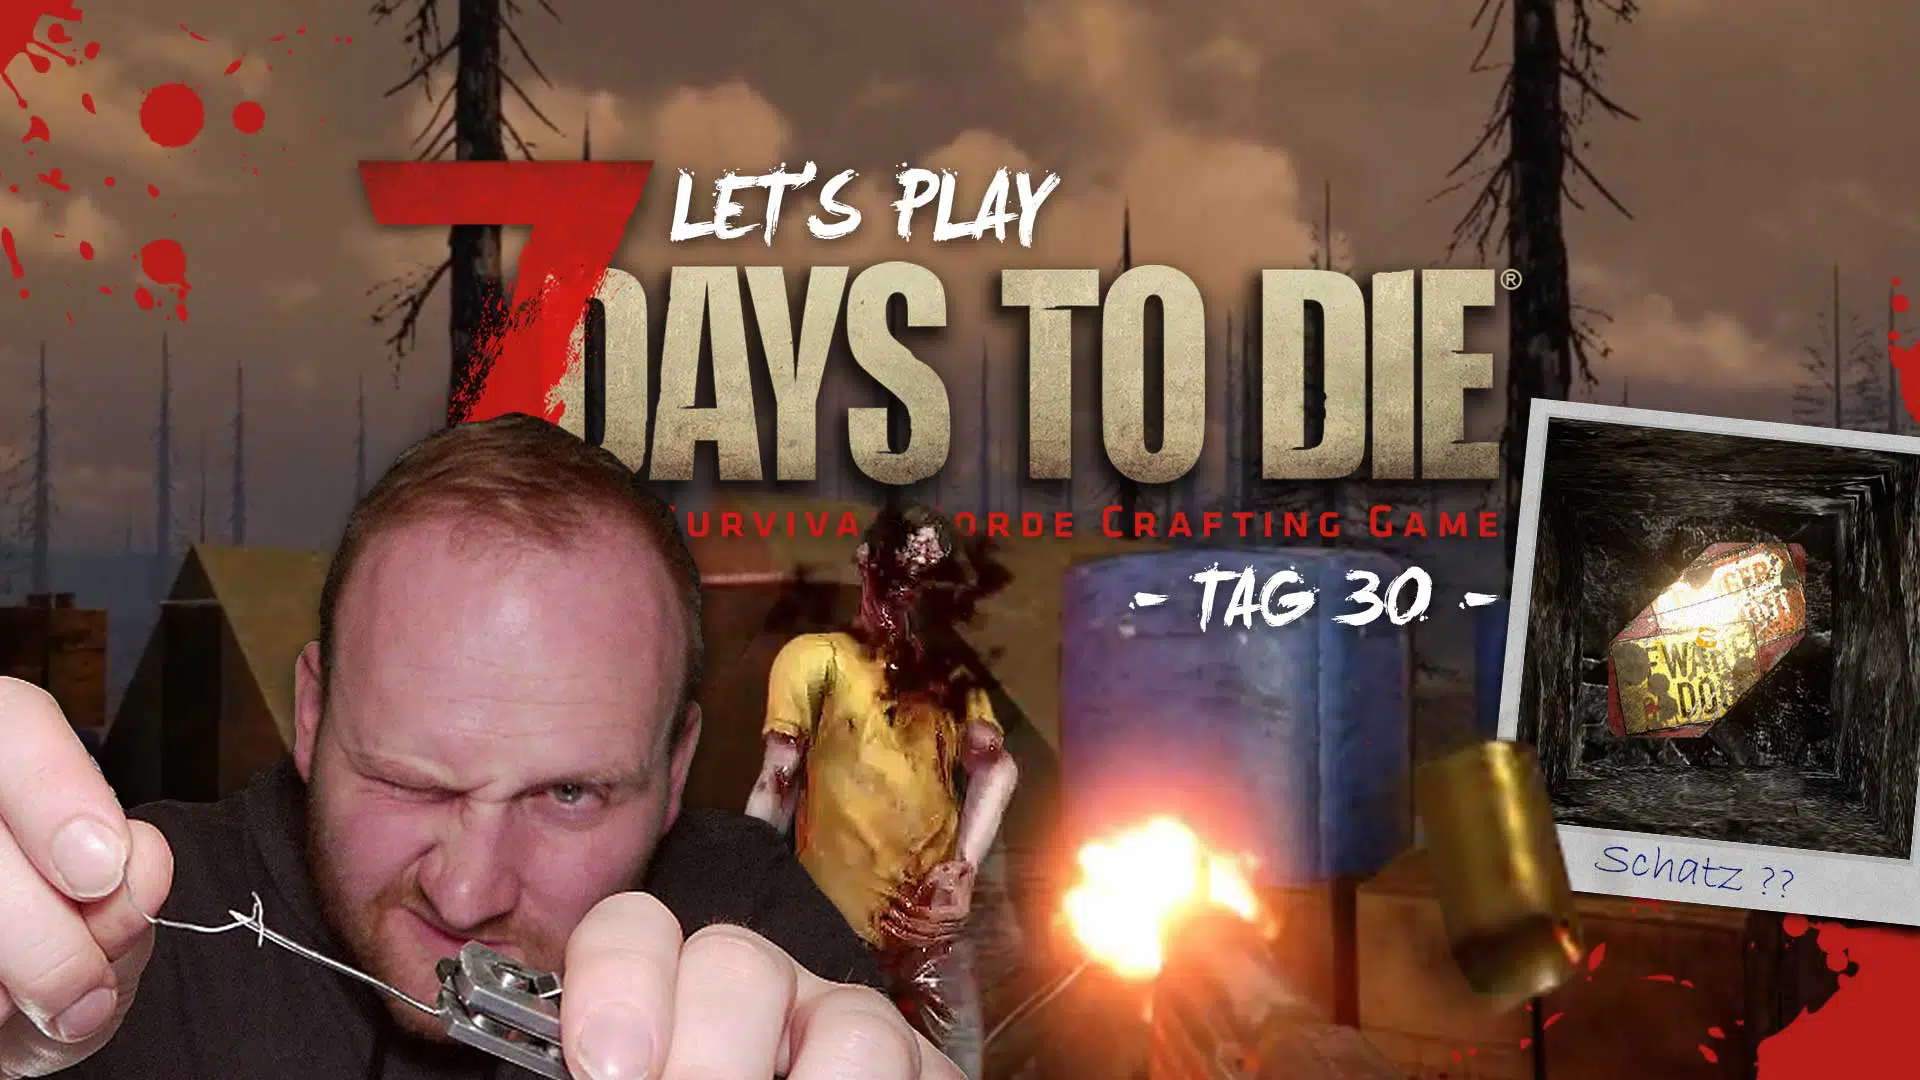 lets play 7 days to die tag 30 GG